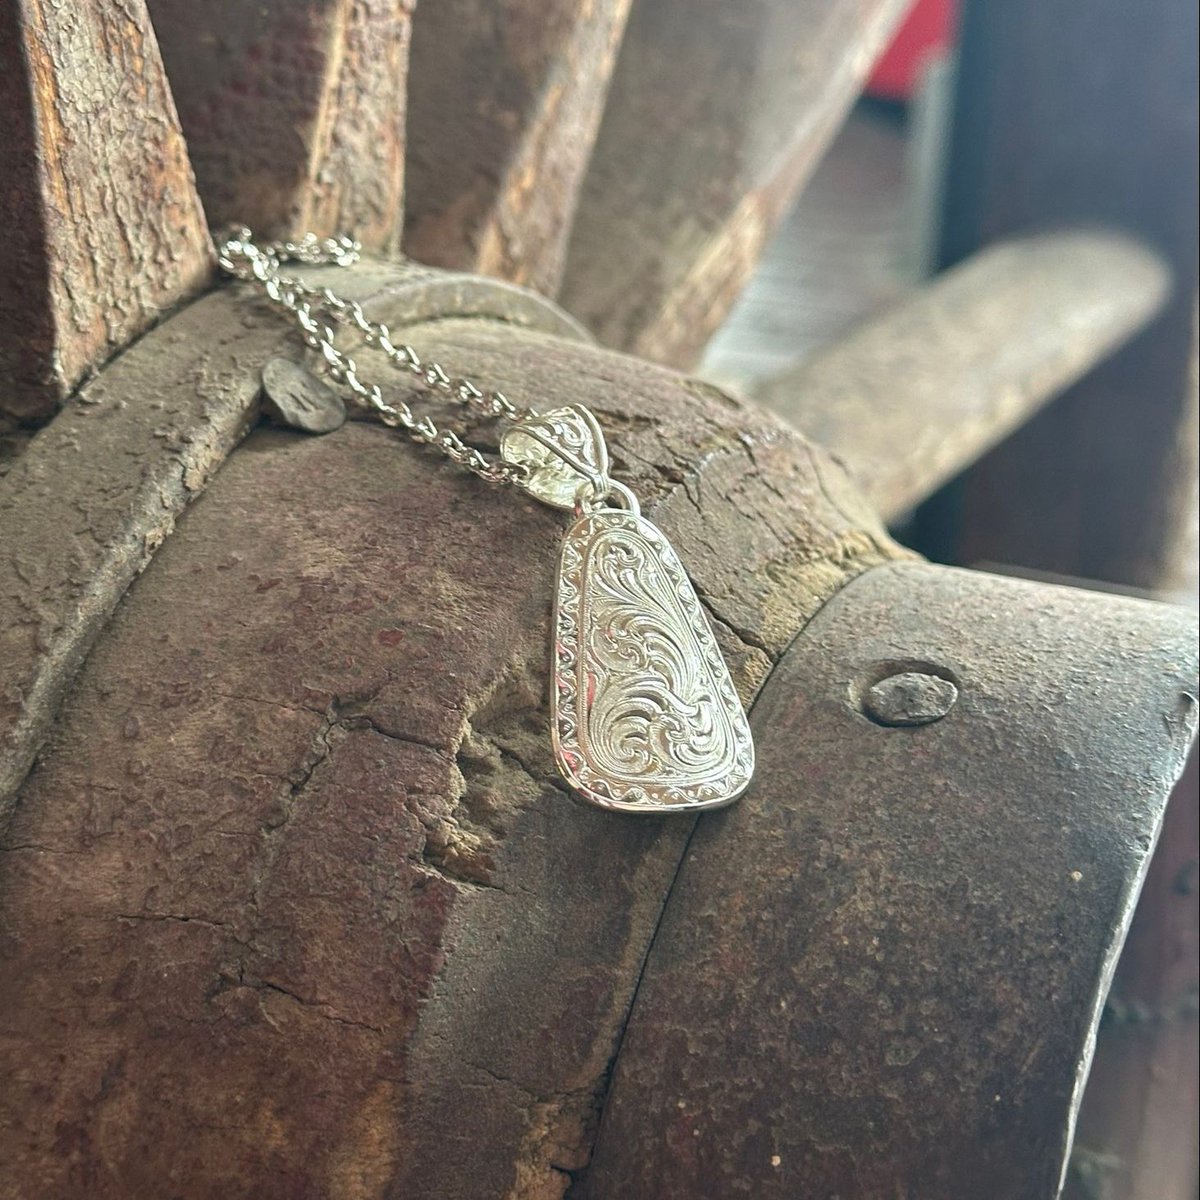 Embrace your style with silver artistry. #MontanaSilversmiths #SilverArtistry #Jewelry